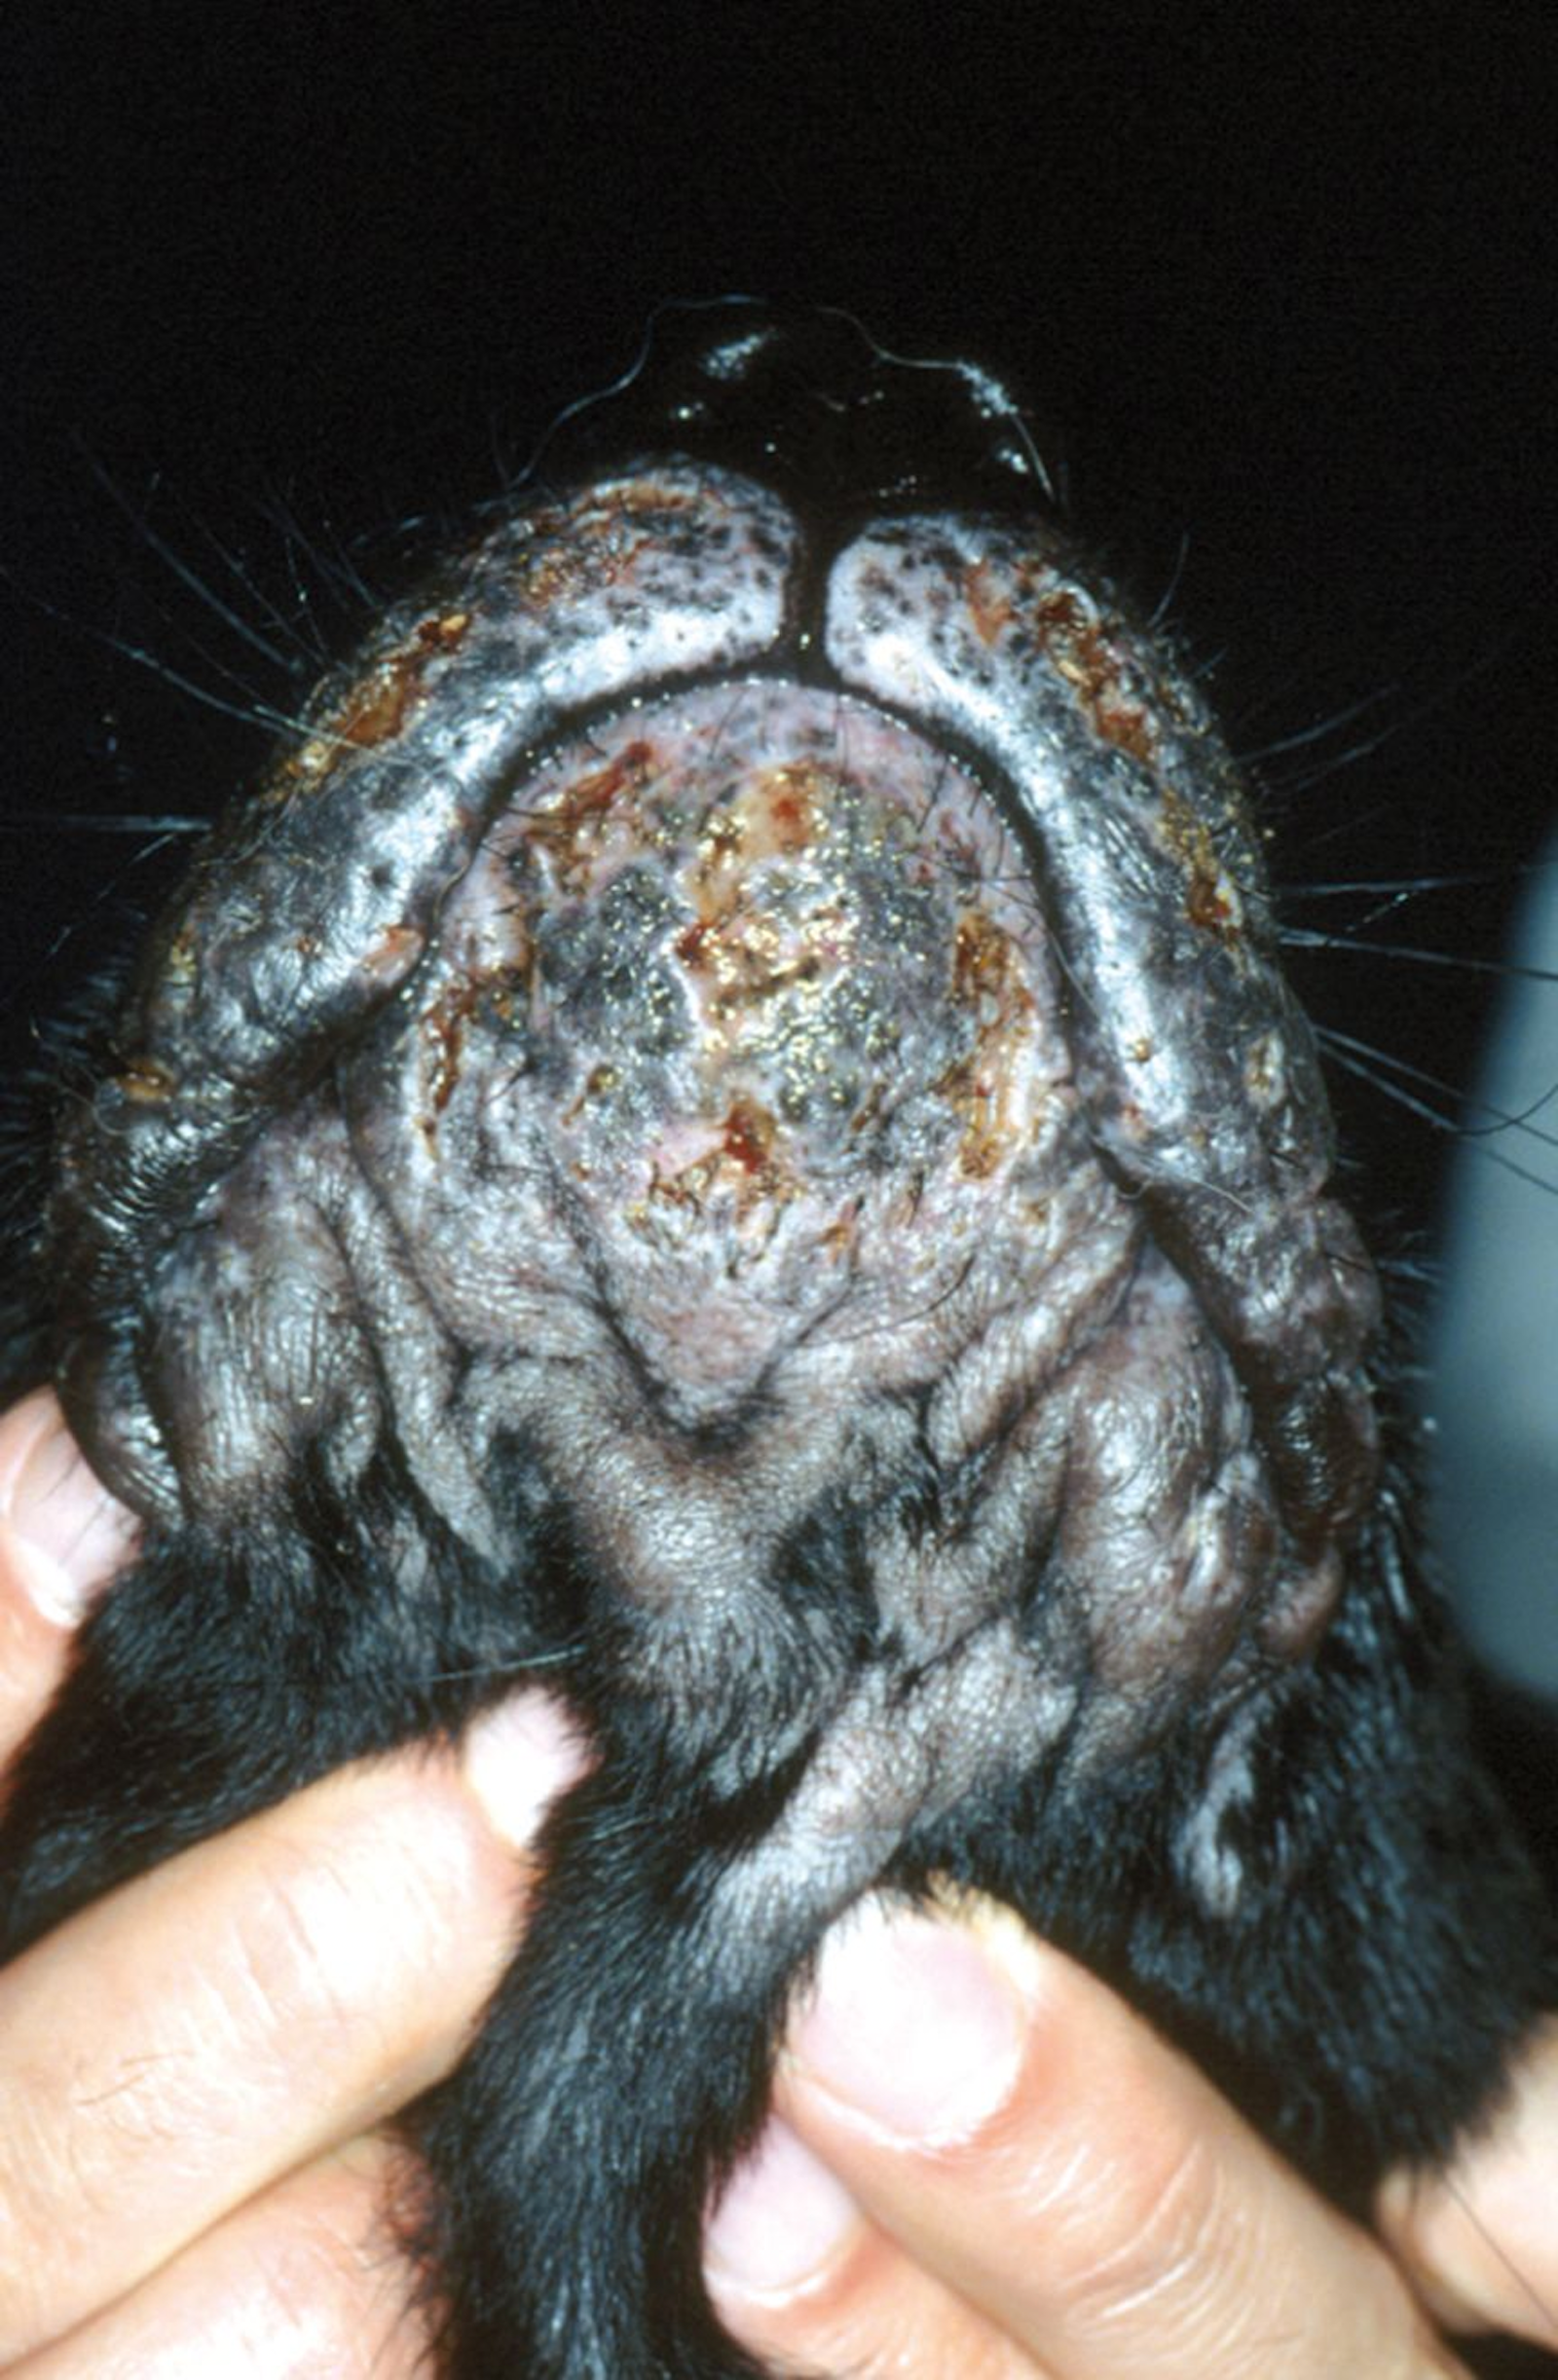 Severe cellulitis at puppy's chin